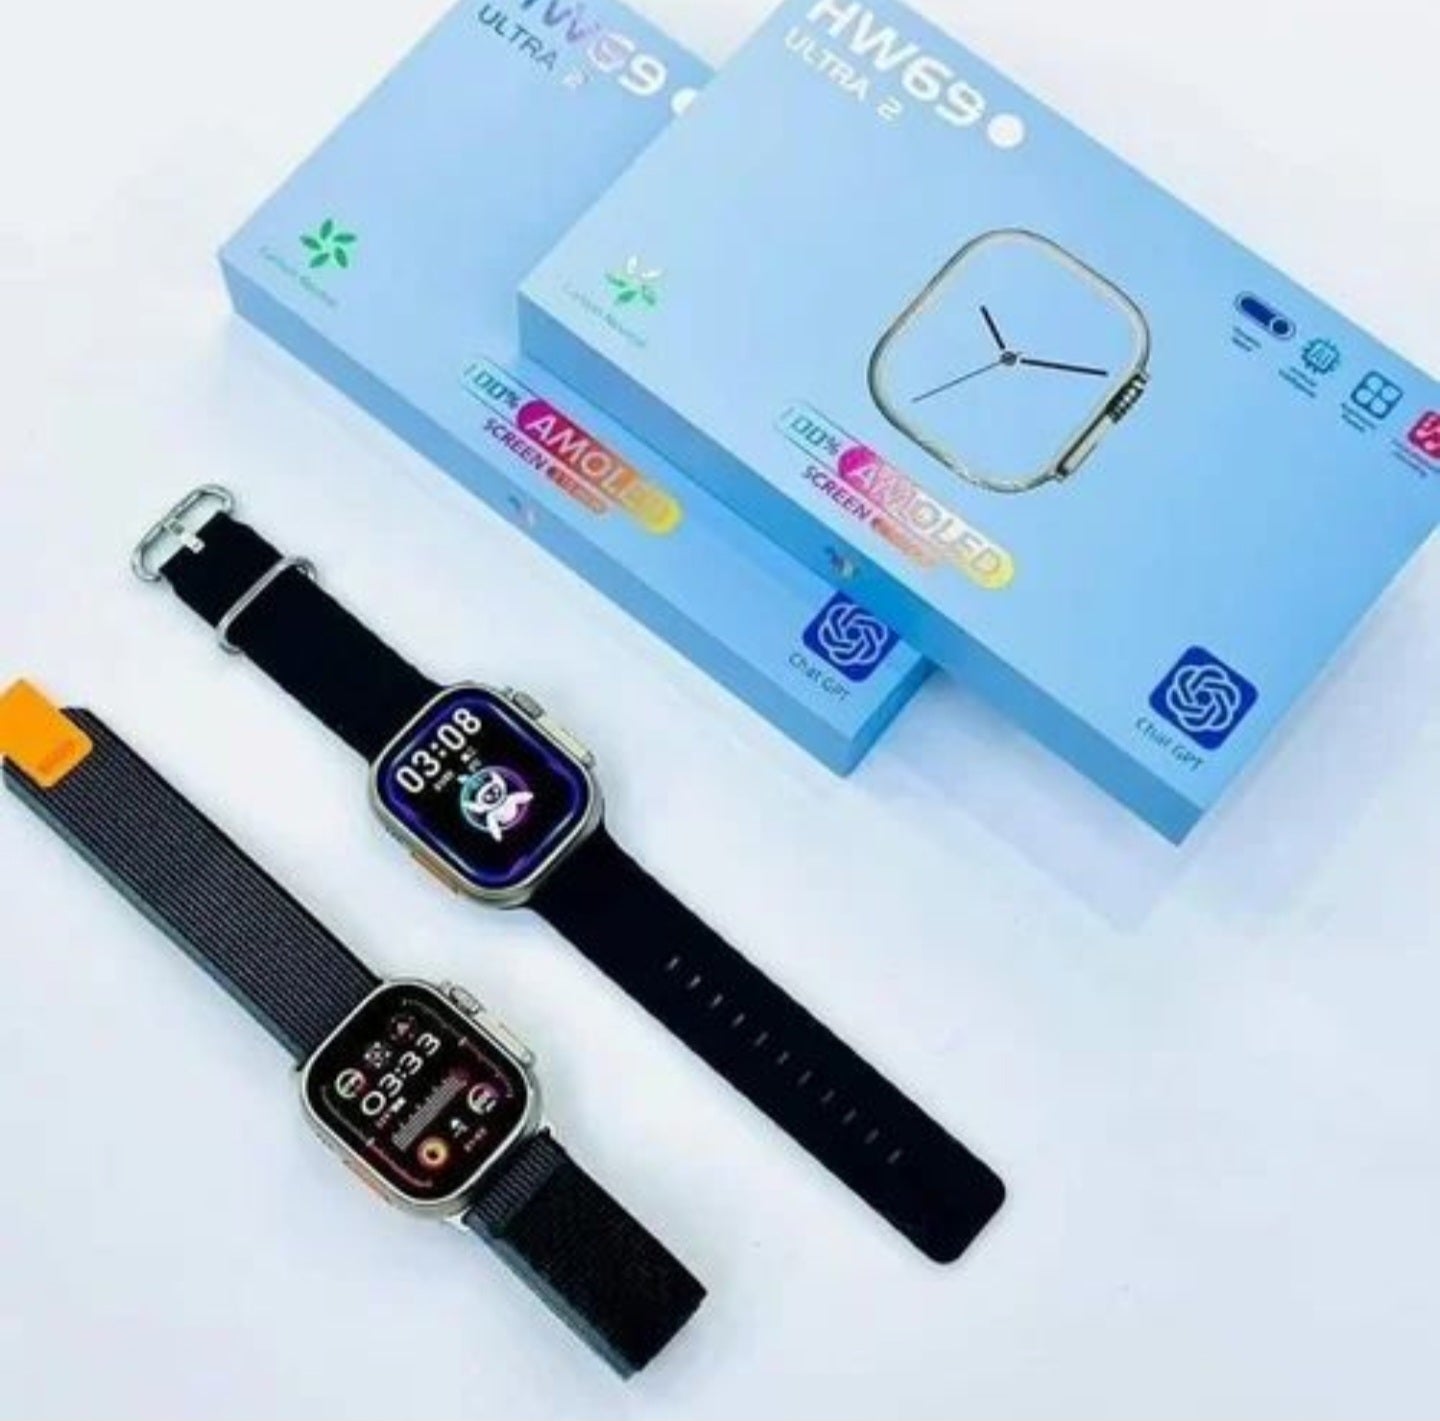 HK9 Ultra 2 Series 9 AMOLED Display Smartwatch with ChatGPT